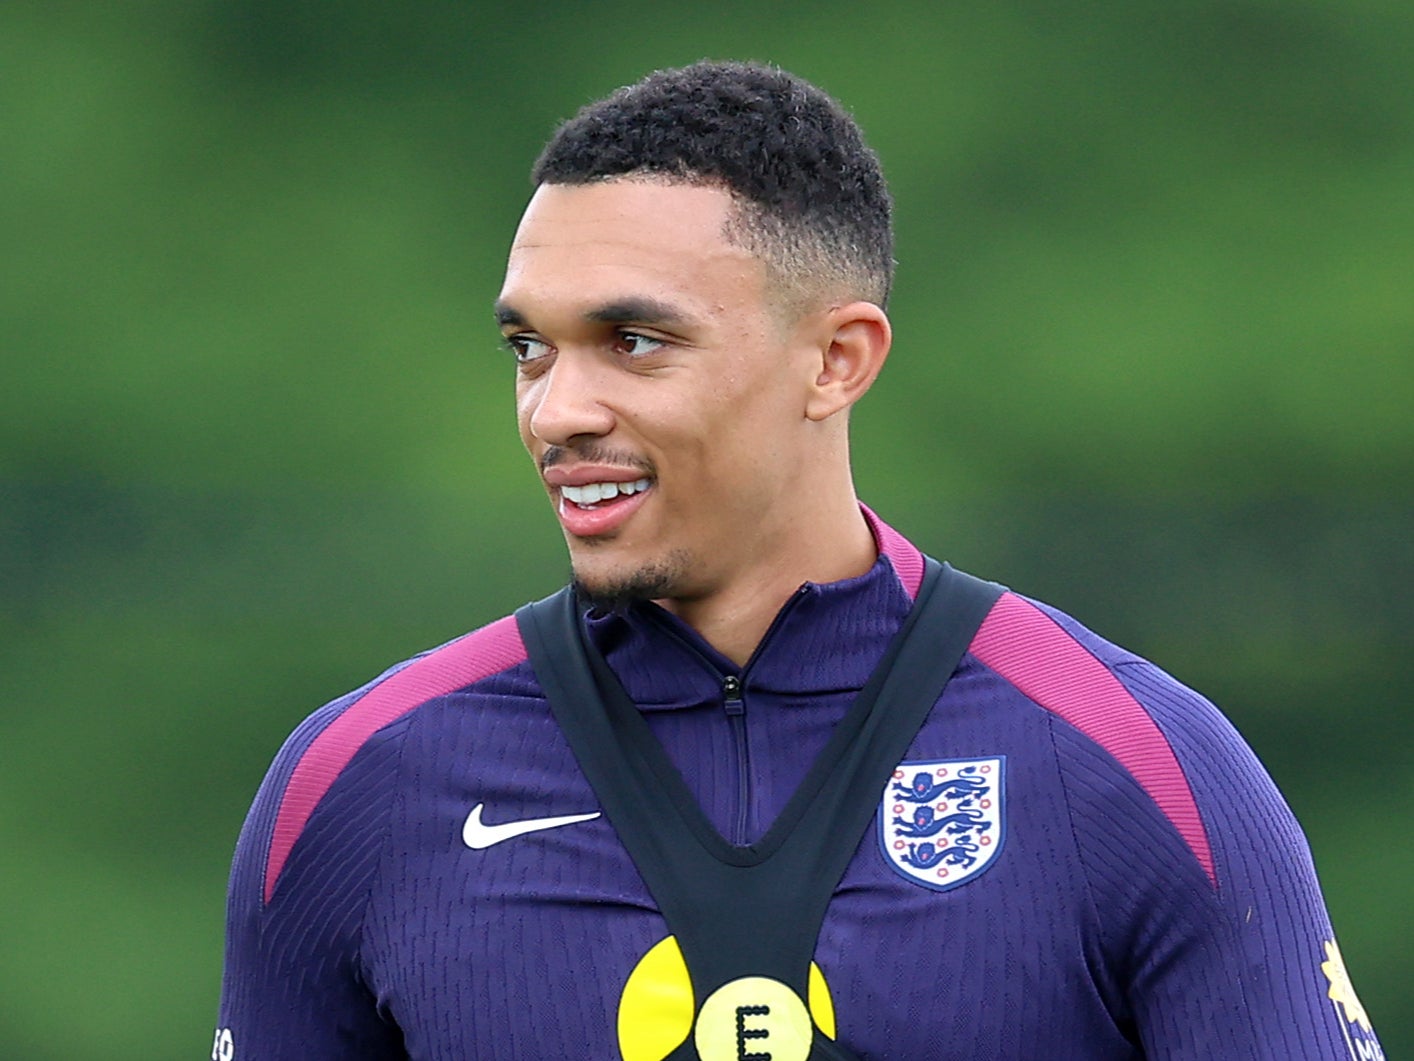 ‘We know he can be a really special player,’ says Trent Alexander-Arnold’s manager